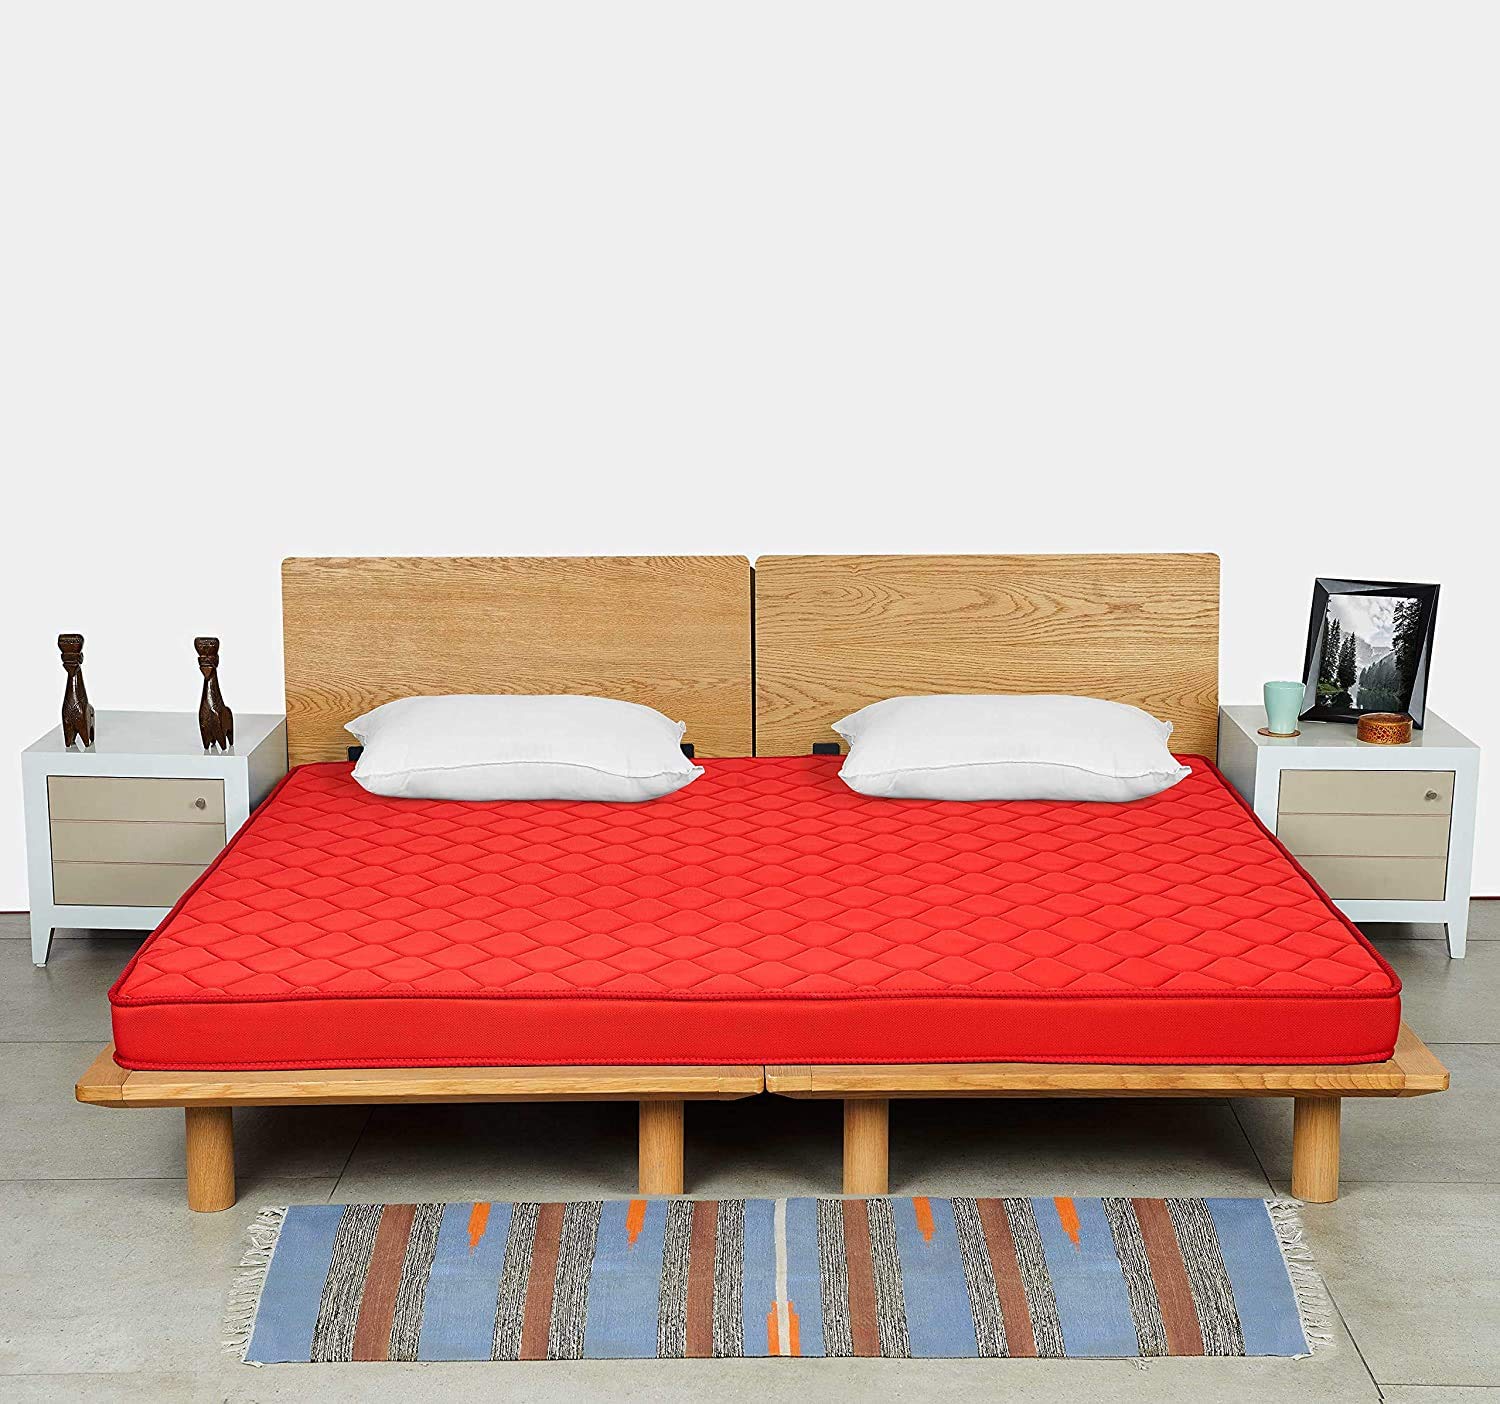 Sleepwell is the most popular and the best bed brand in India